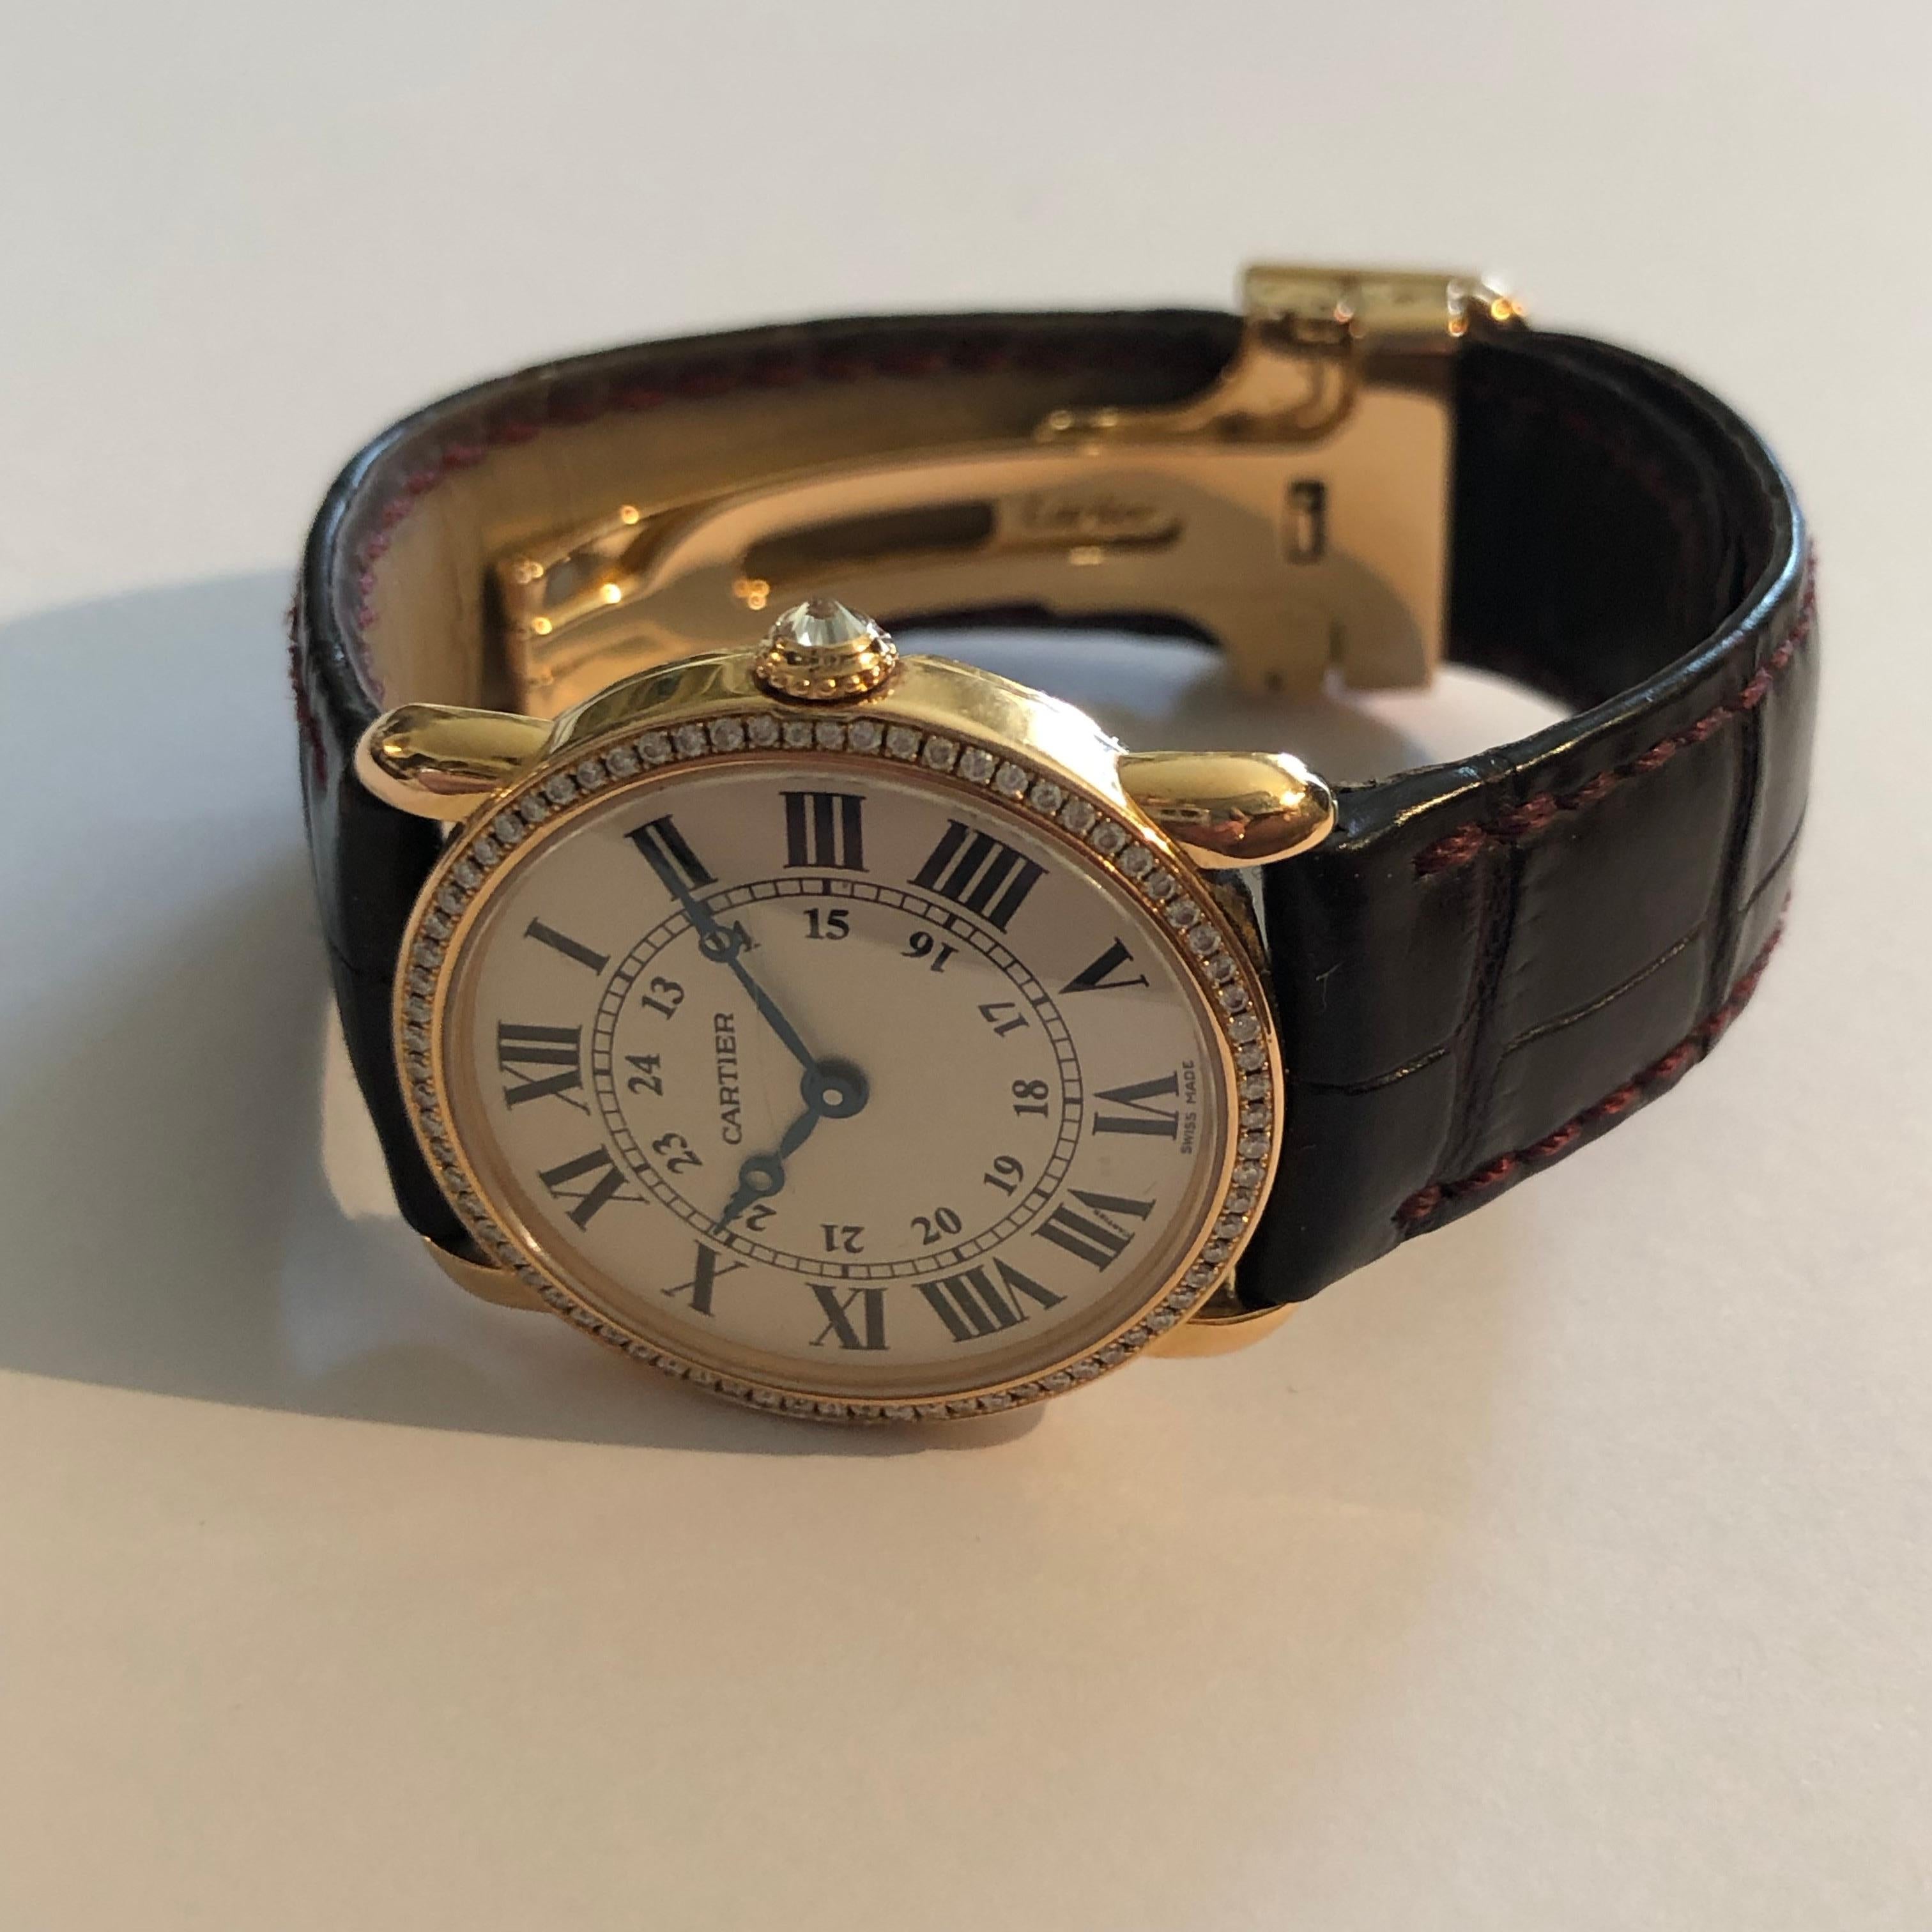 Watch Ronde Louis Cartier 29mm by Cartier rose gold (case, and buckle) - diamond crowned and diamonds cased. 

Signed, numbered and stamped.

Quartz working movement. Bracelet has a bit worn. One little scratche on glass.
Model still on sale on